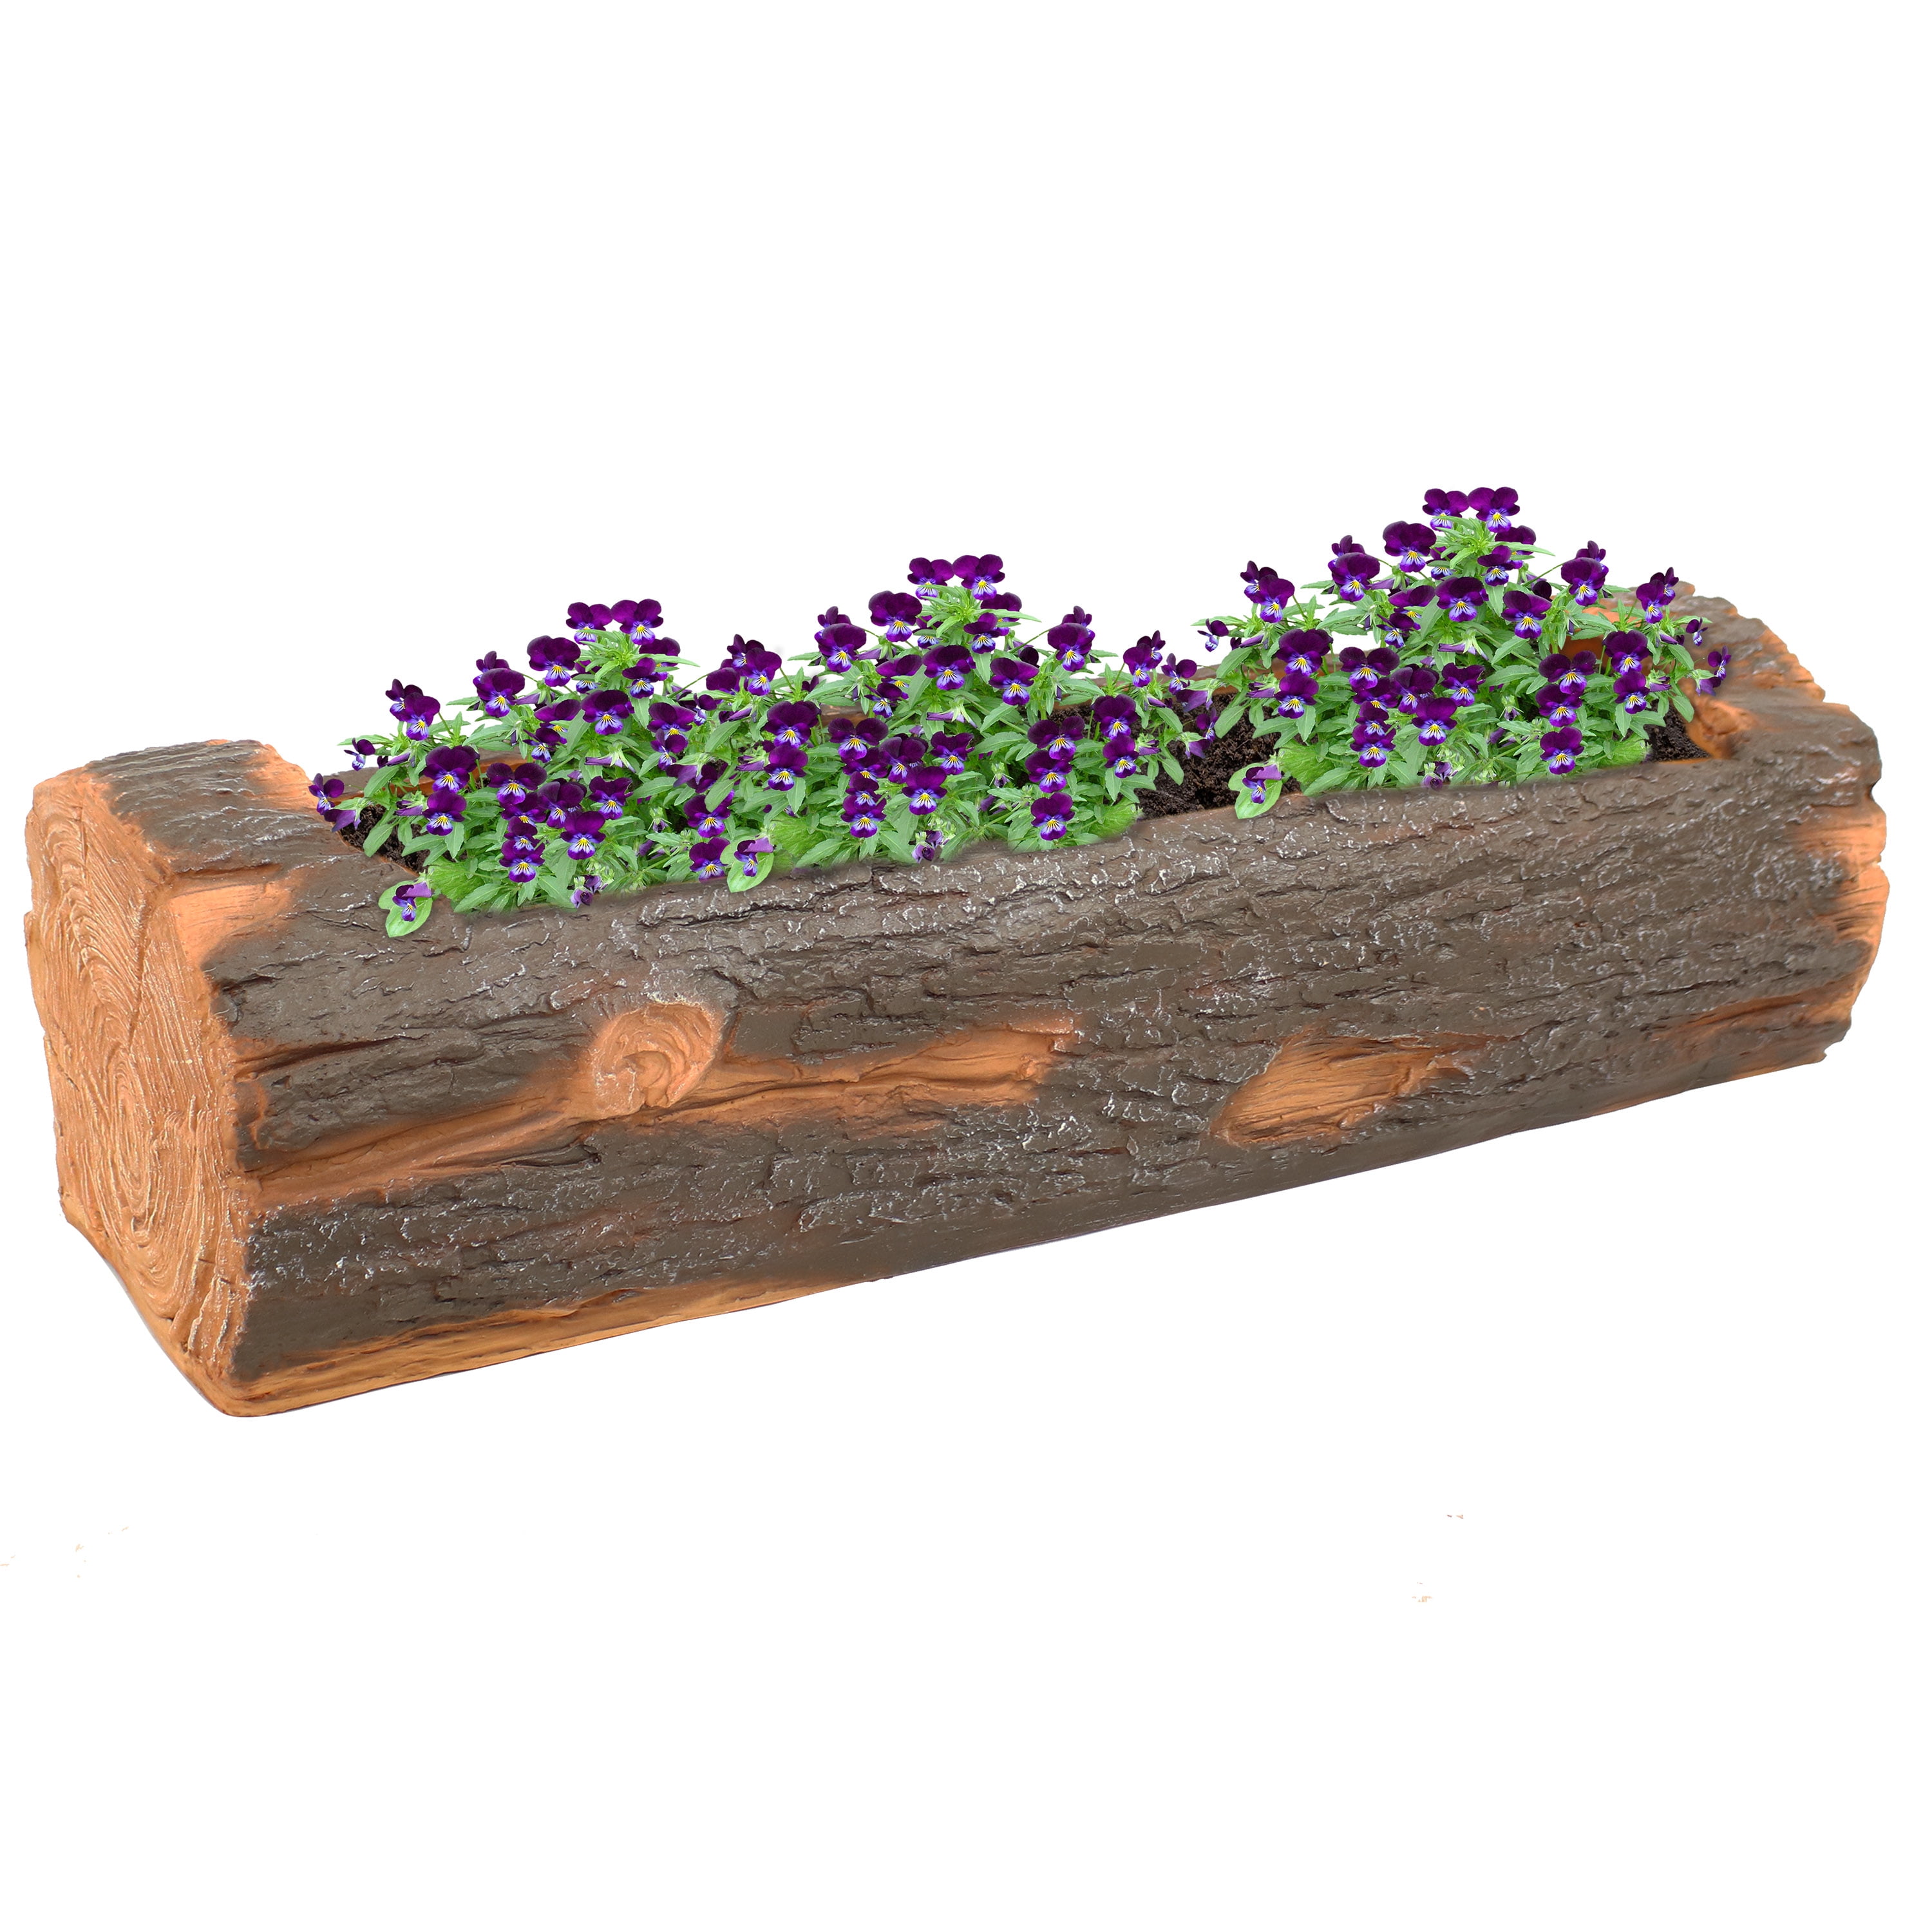 Pack of 1 Accent Decor 9.25" x 4" Woodland Planter Box with Plastic Liner 